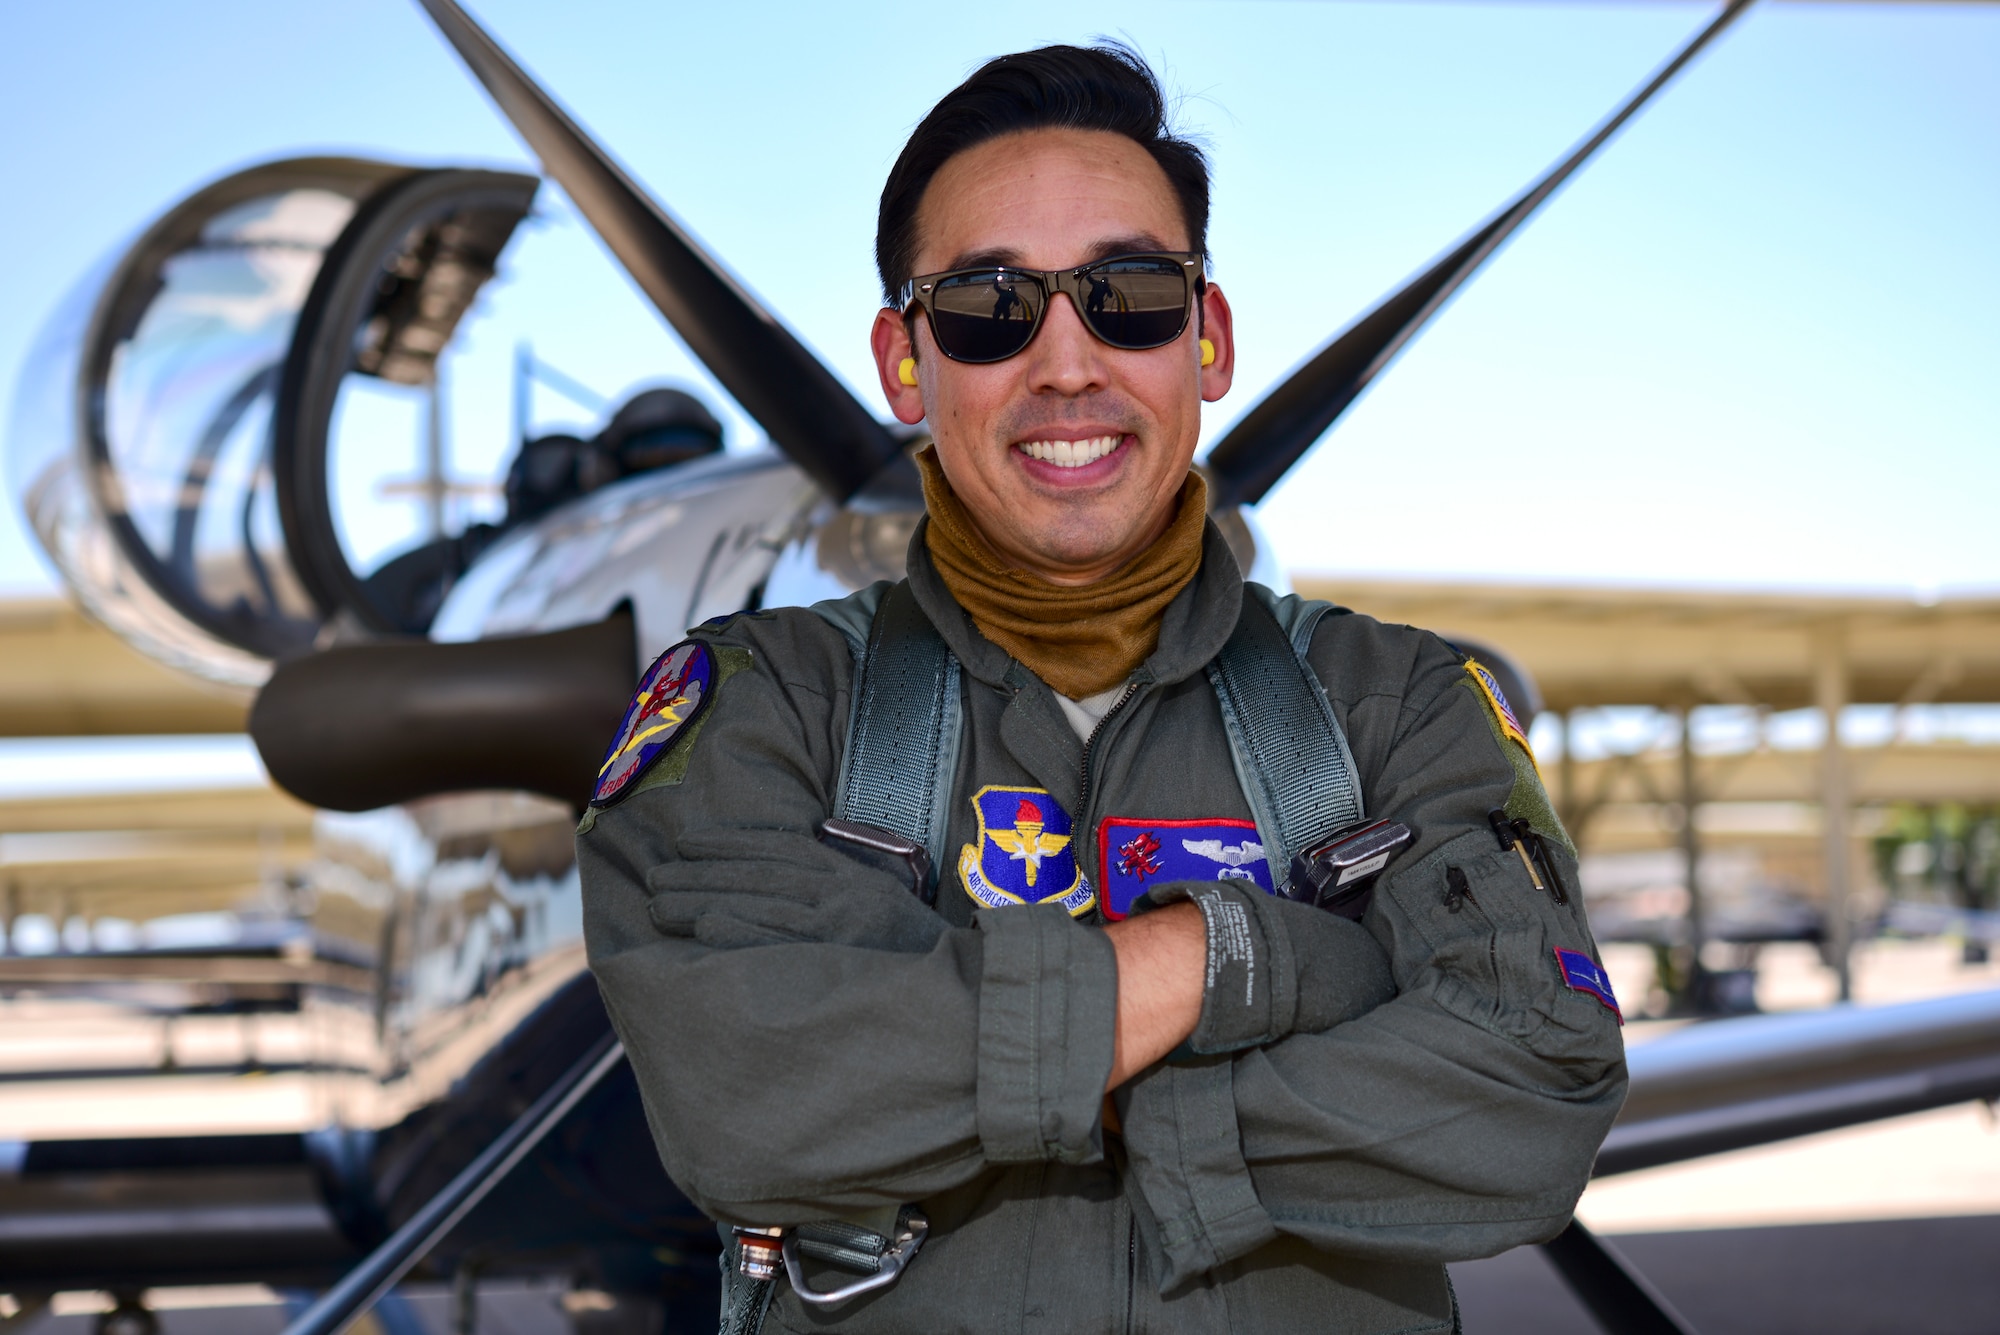 Capt. Joshua White, 434th Flying Training Squadron X flight commander and instructor pilot, stands in front of a T-6 Texan II, April 23, 2020 at Laughlin Air Force Base, Texas, wearing his mask around his neck. White finds being an instructor pilot during the COVID-19 pandemic proves a challenge while following safety guidances. “As an instructor pilot, it’s our job to be in close proximity to many people--students, other instructors, and maintainers,” White said. “It’s been difficult to find the balance between social distancing and being an effective instructor.” (U.S. Air Force photo by Senior Airman Anne McCready)